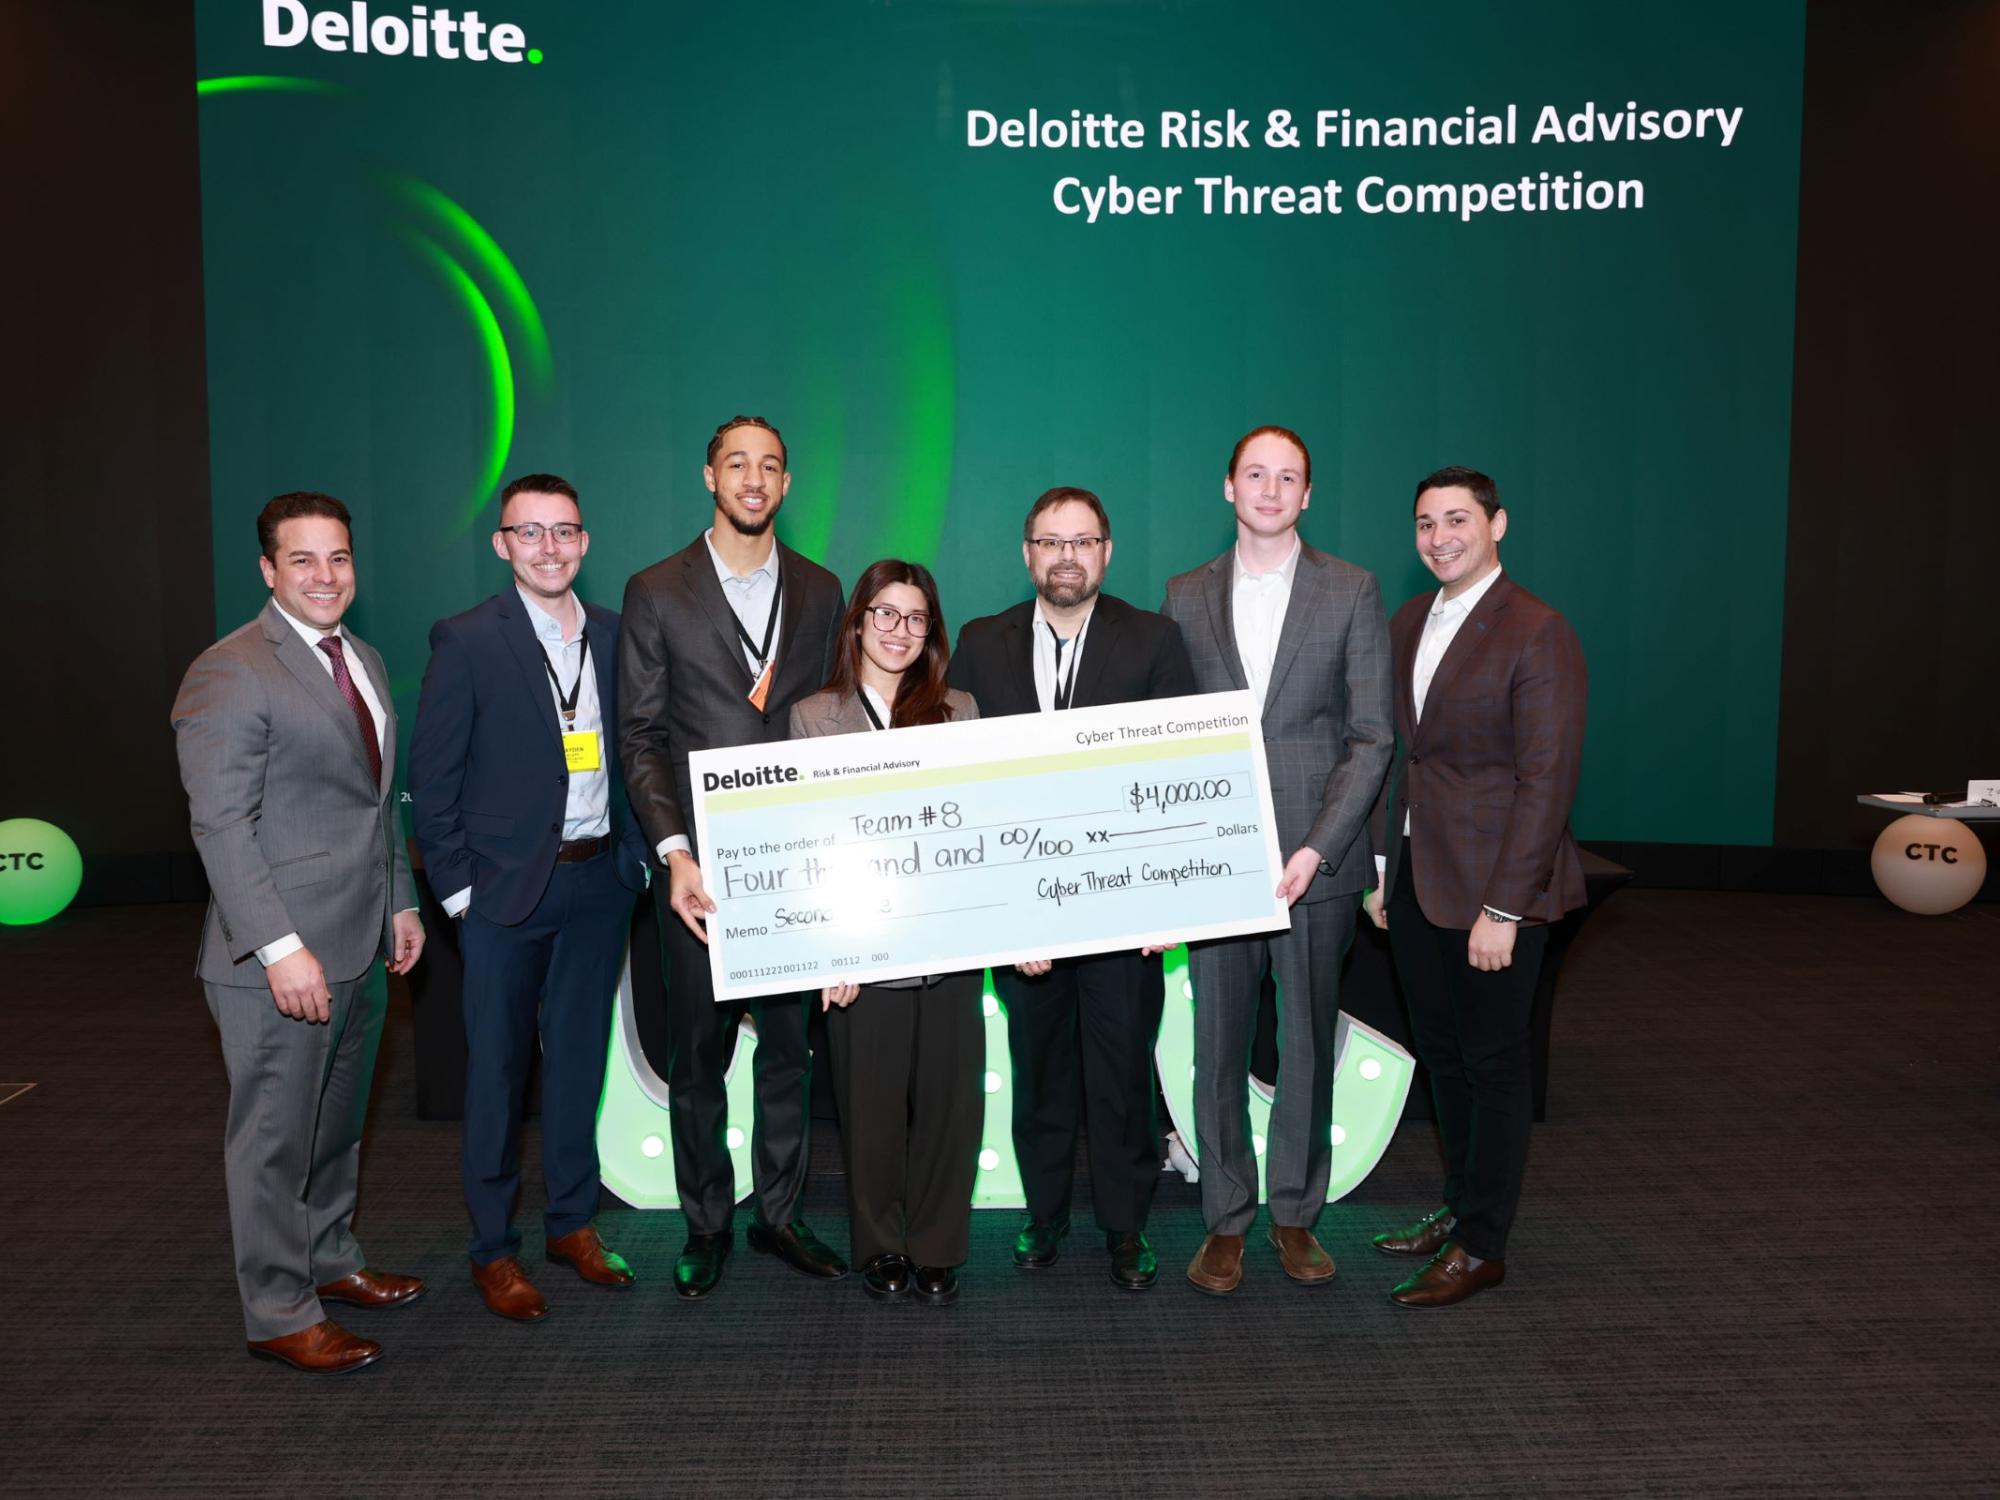 Cybersecurity student earns second place in Deloitte Cyber Threat Competition